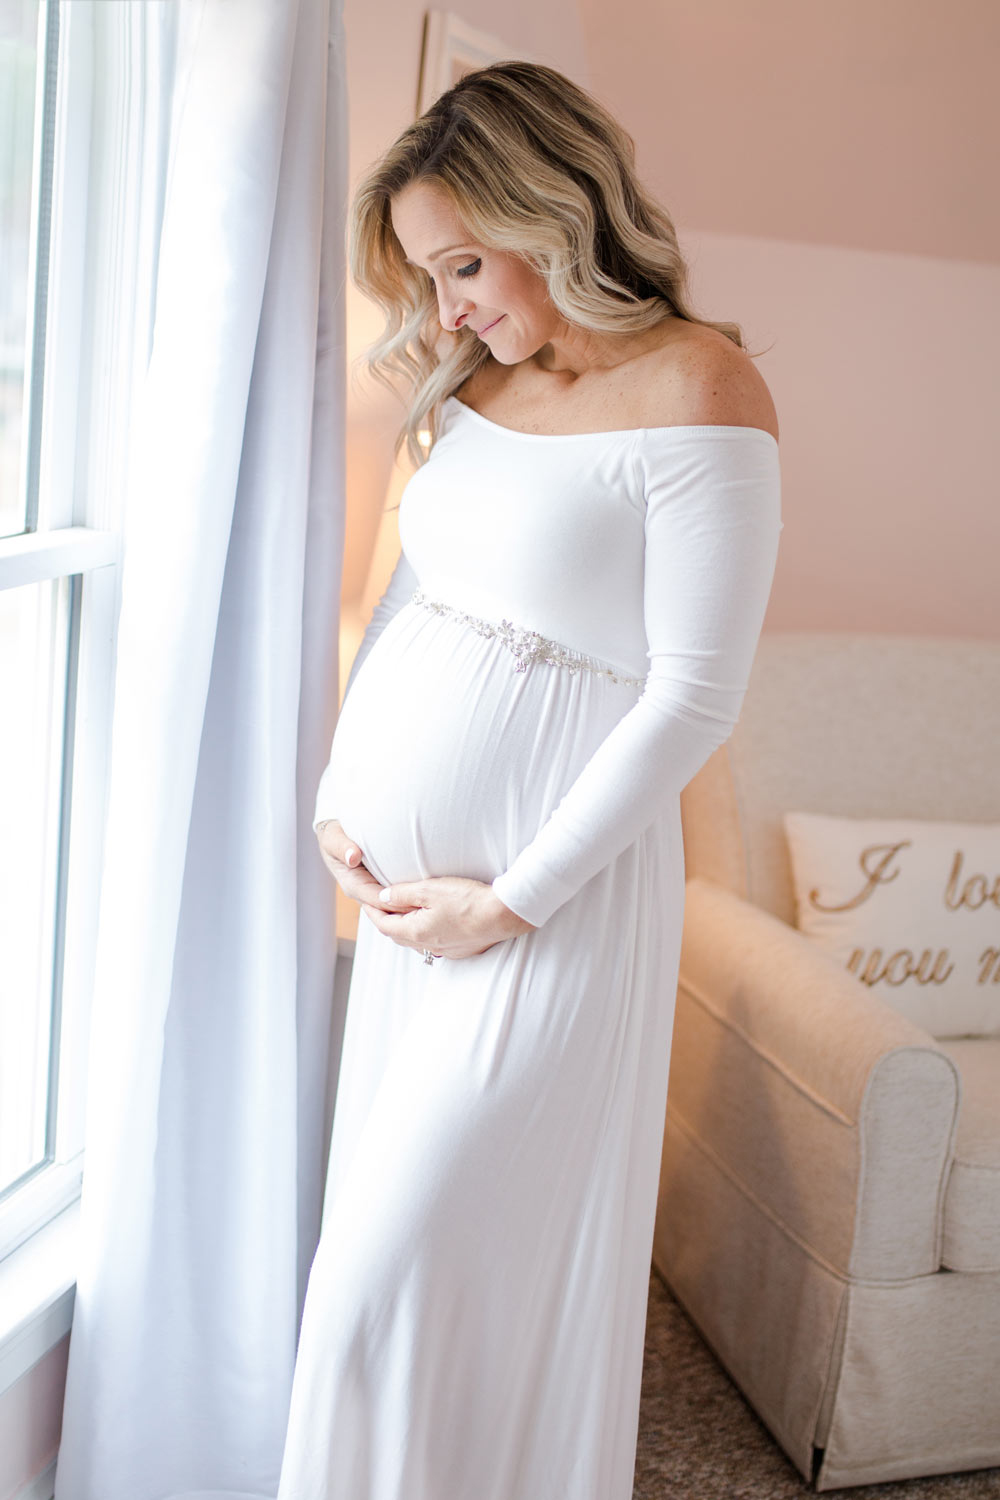 Beautiful Mother to be with a baby bump and white maternity dress